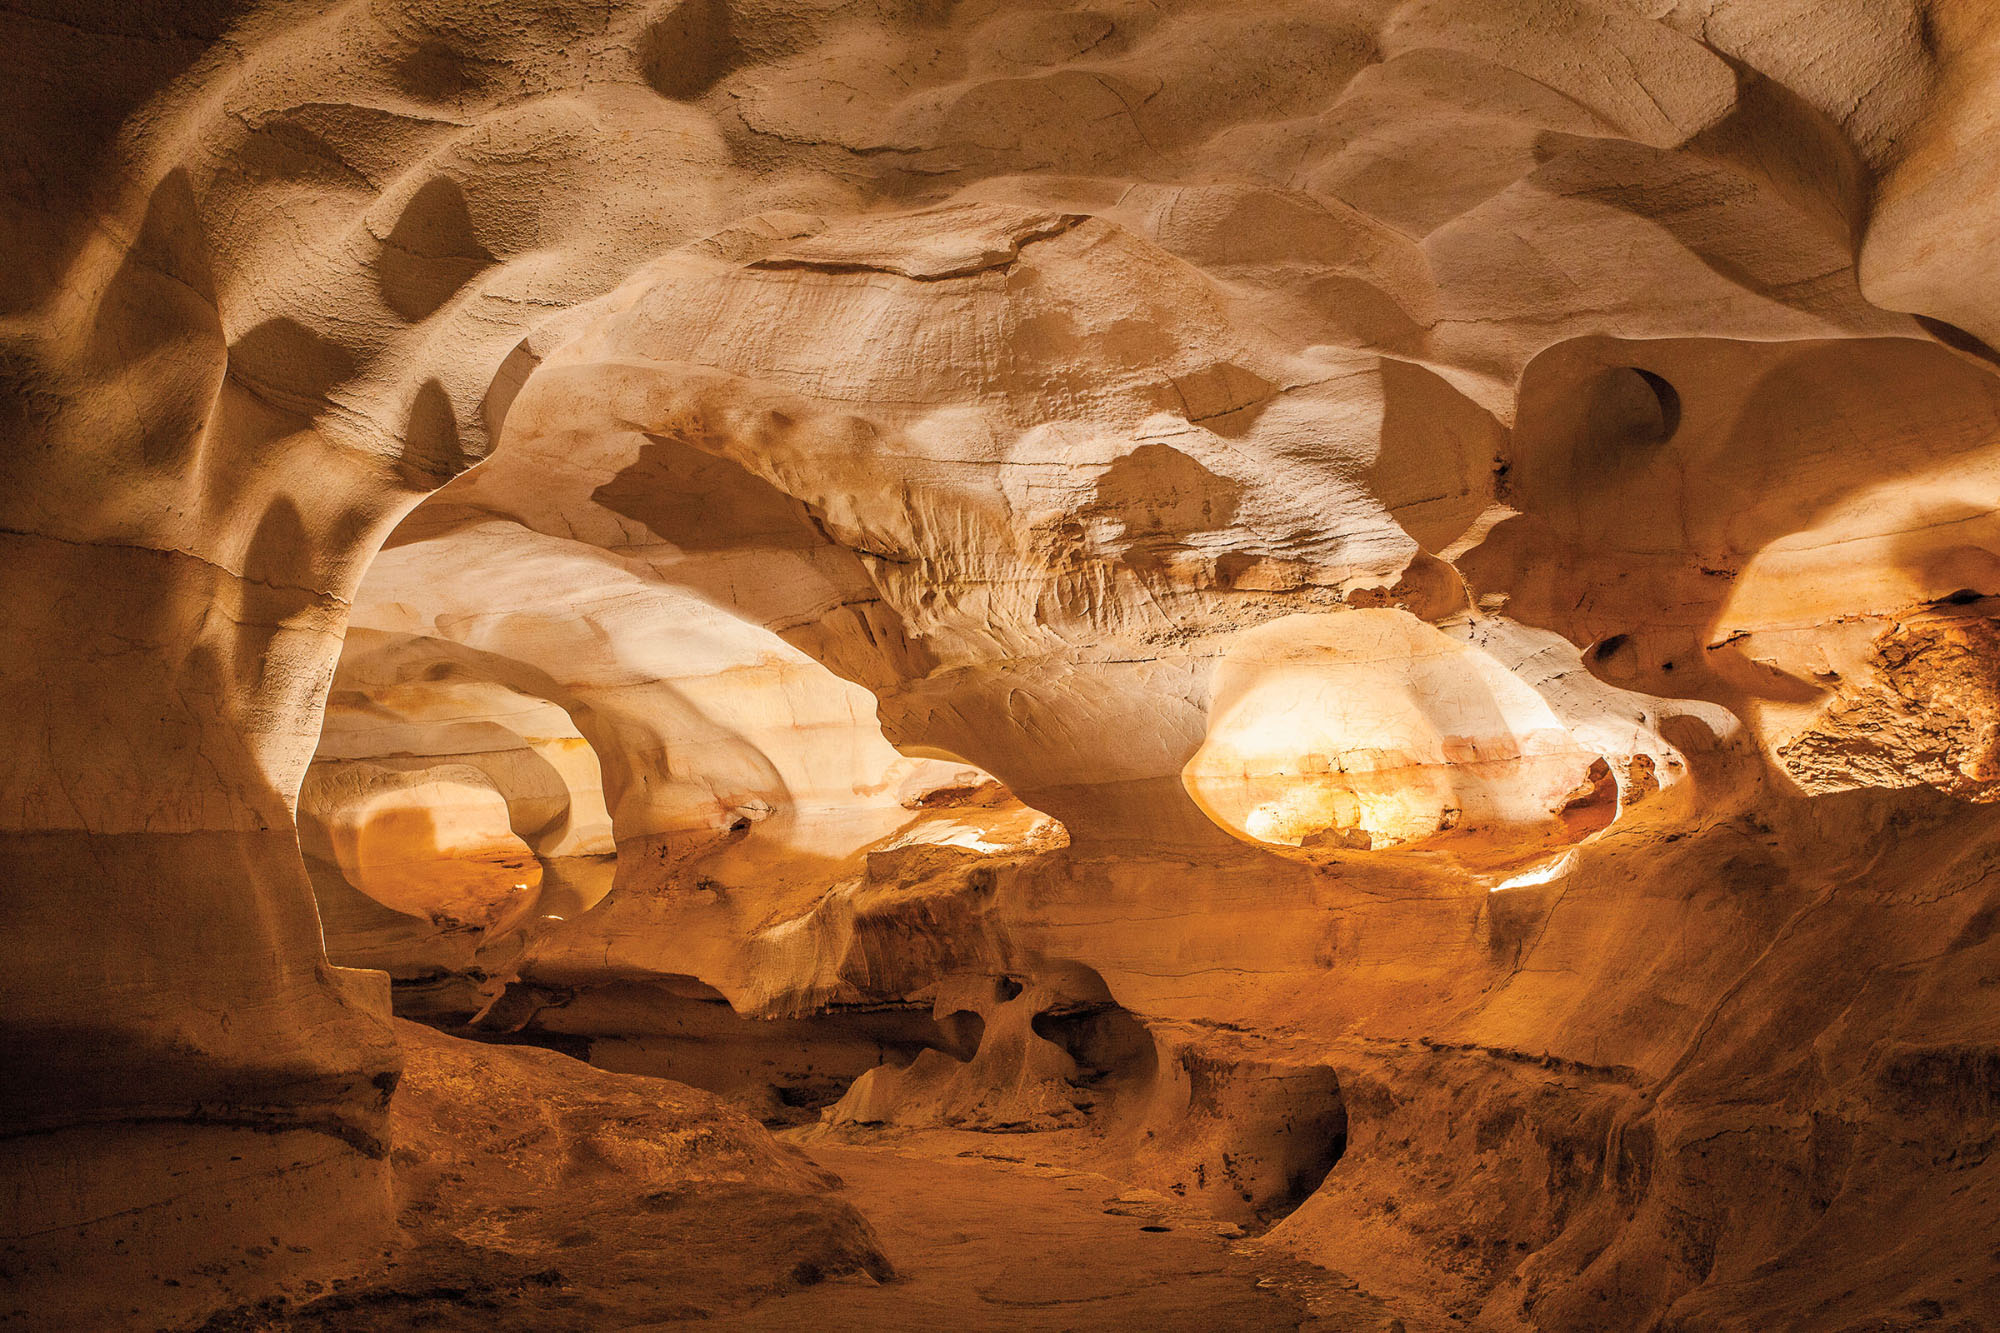 An image of a golden-tan cave lit up to show the large and various caverns and spaces within